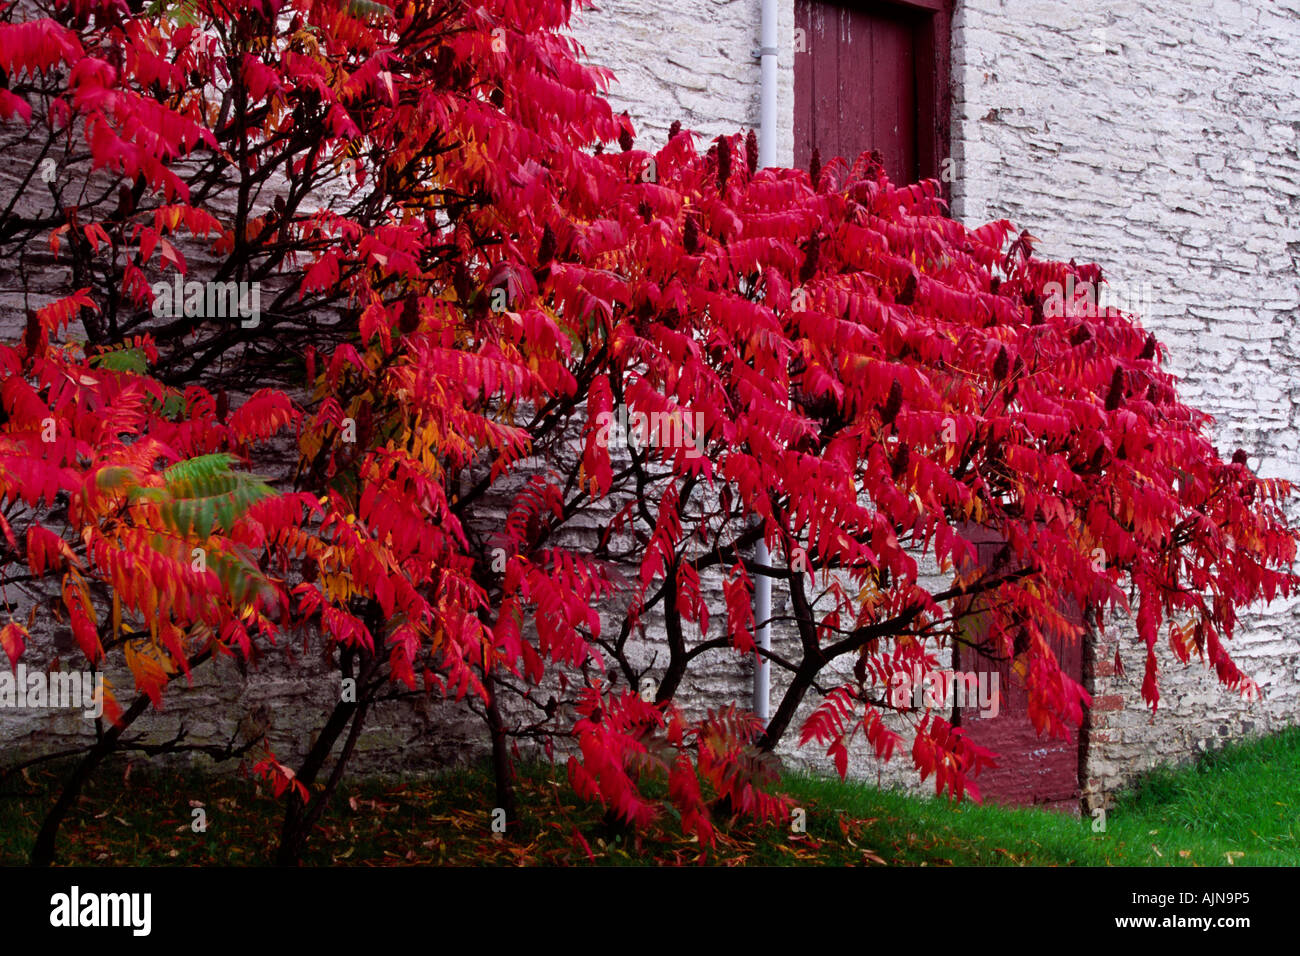 Stag's horn Sumach (Rhus typhina). Autumn foliage of trees growing by a barn. Powys, Wales, UK. Stock Photo